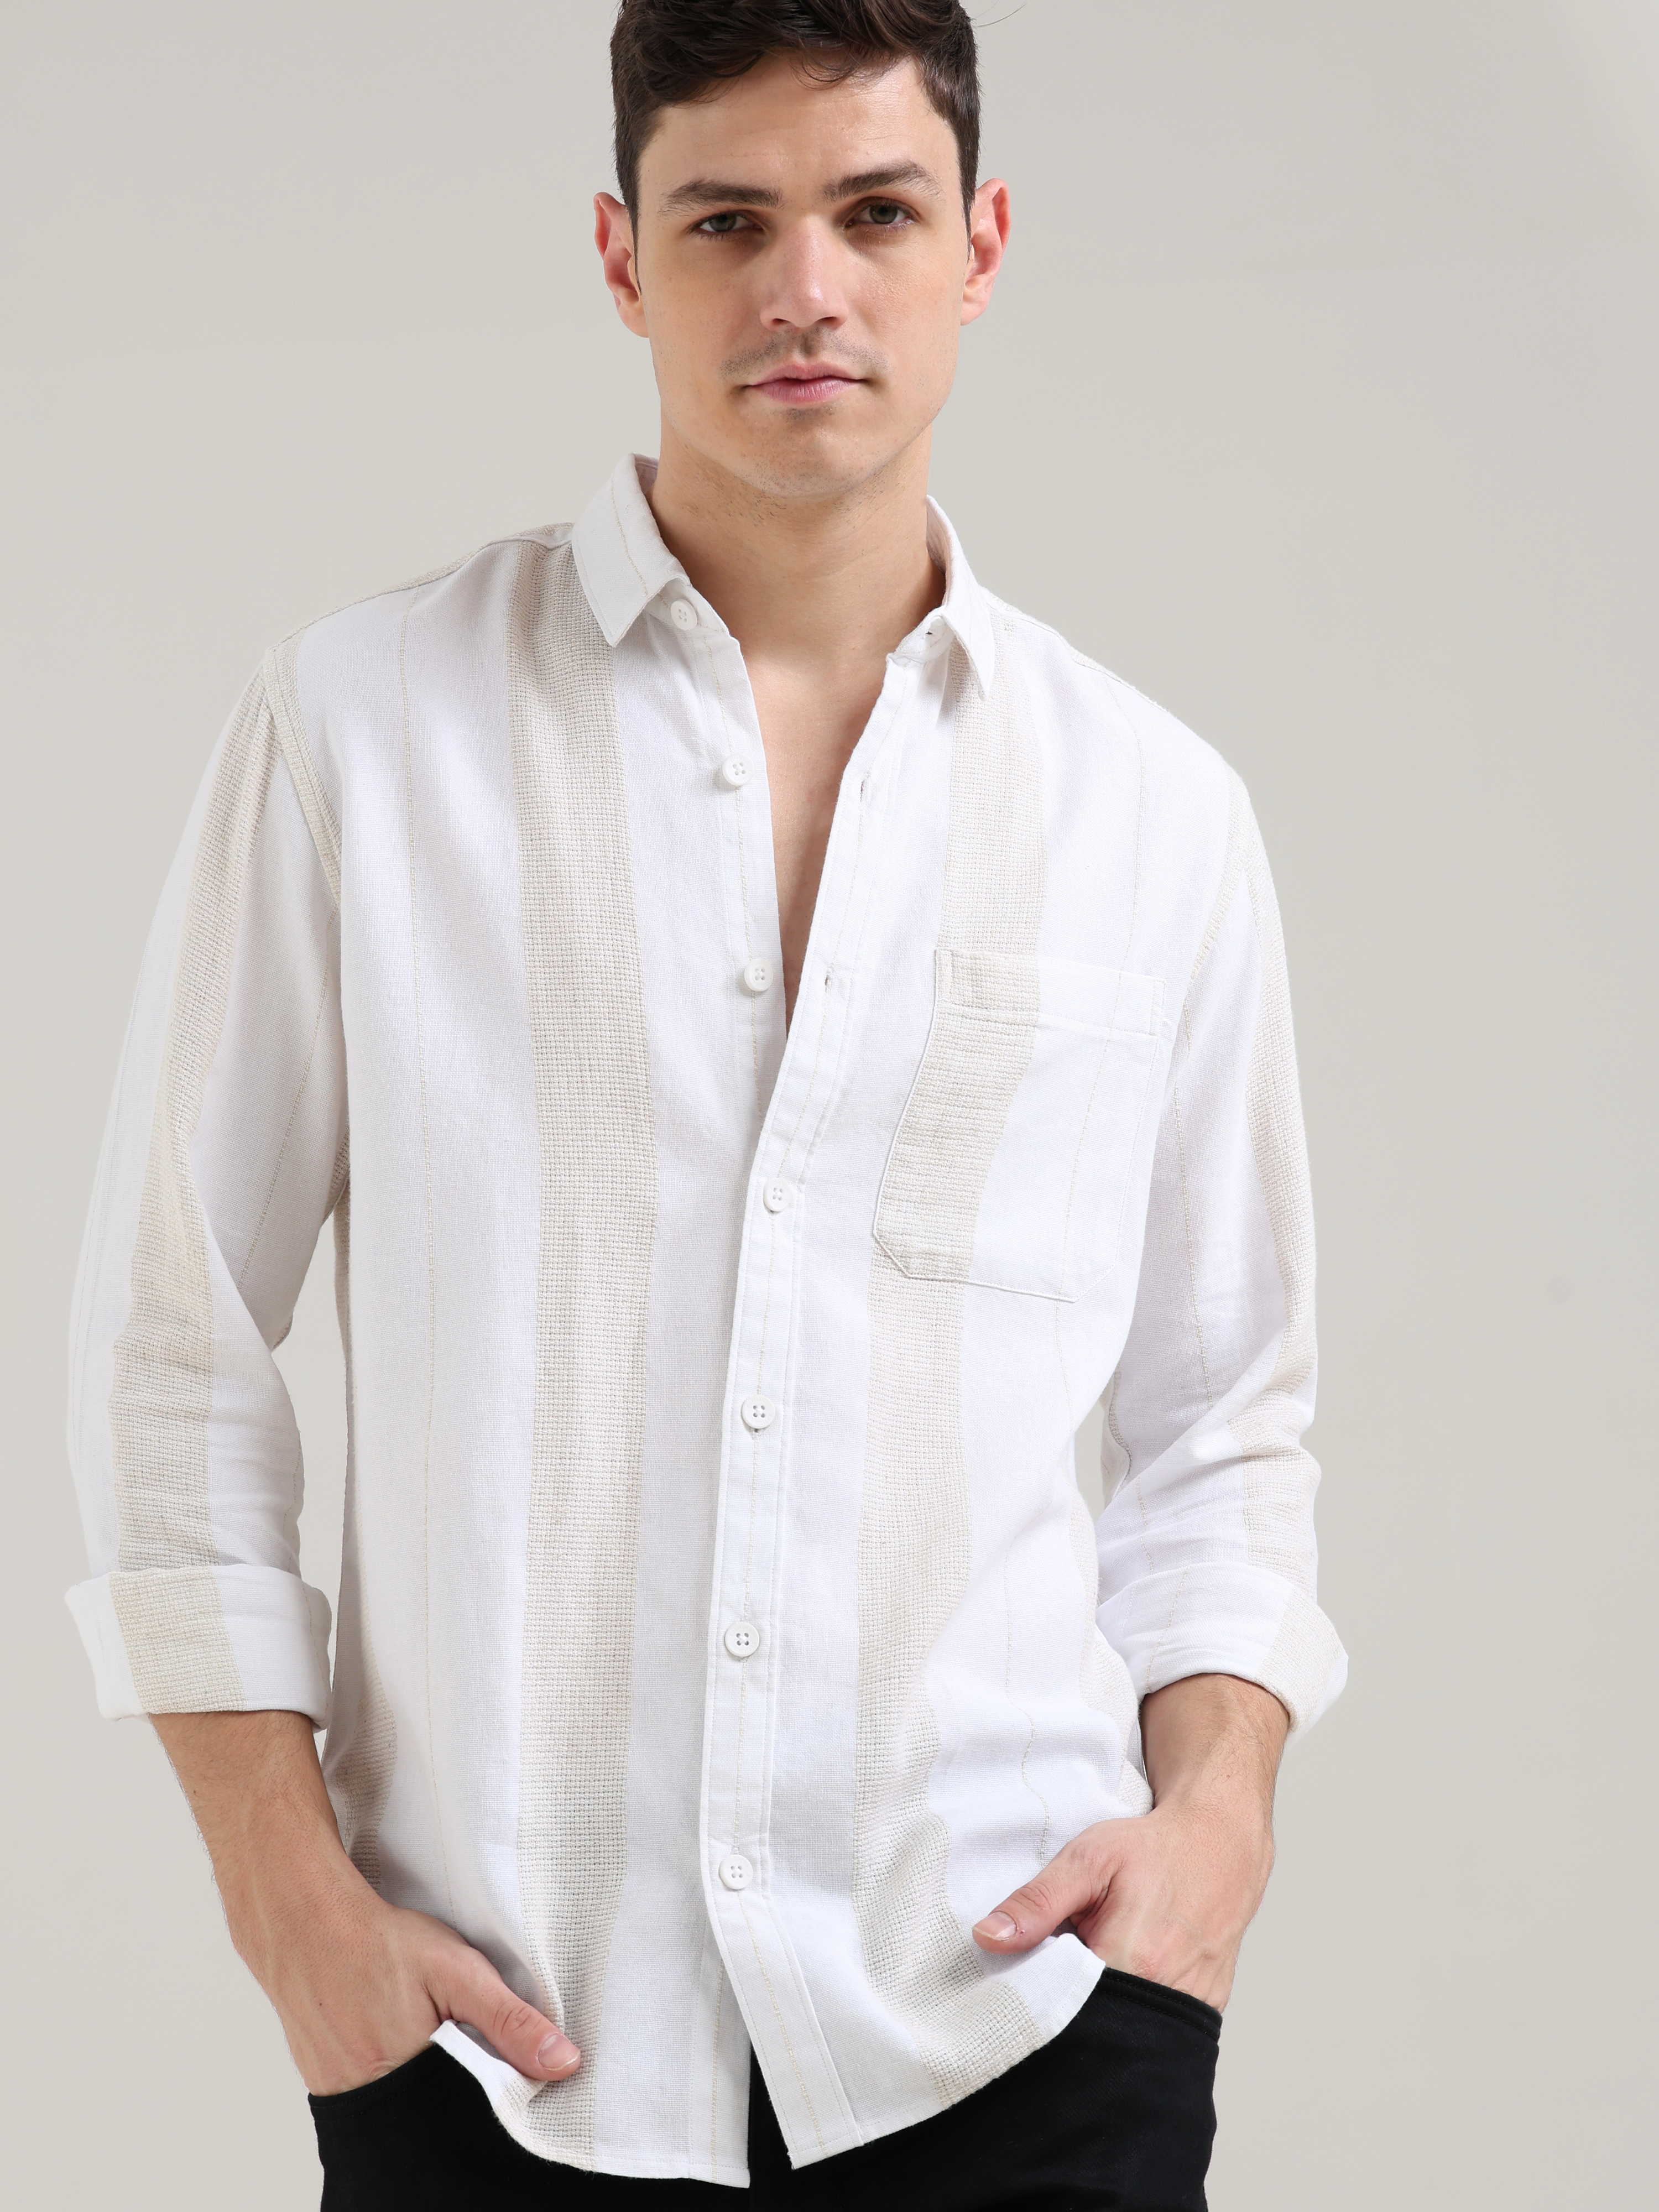 Pure cotton white&cream Casual shirt shop online at Estilocus. 100% Pure Cotton 90% LESS WATER USAGE LOWER CARBON EMISSION NO HARMFUL DYES ON YOUR SKIN NO SYNTHETIC PESTICIDES IN OUR SOIL • Full-sleeve check shirt• Cut and sew placket• Regular collar• Dou